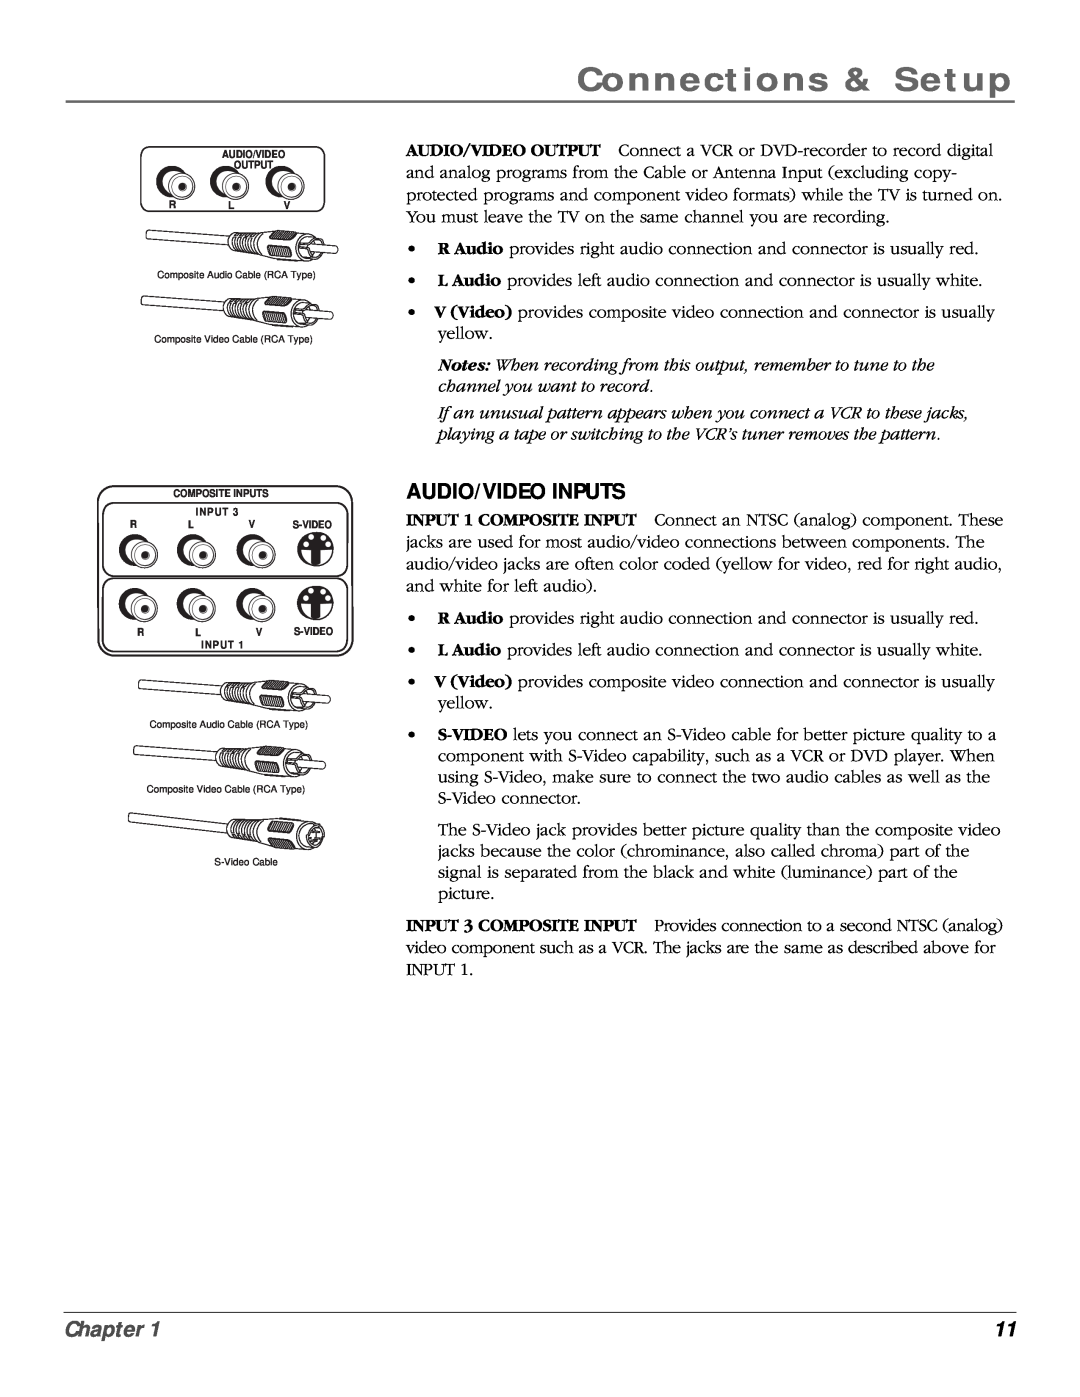 RCA scenium manual Audio/Video Inputs, Connections & Setup, Chapter, S-Video 